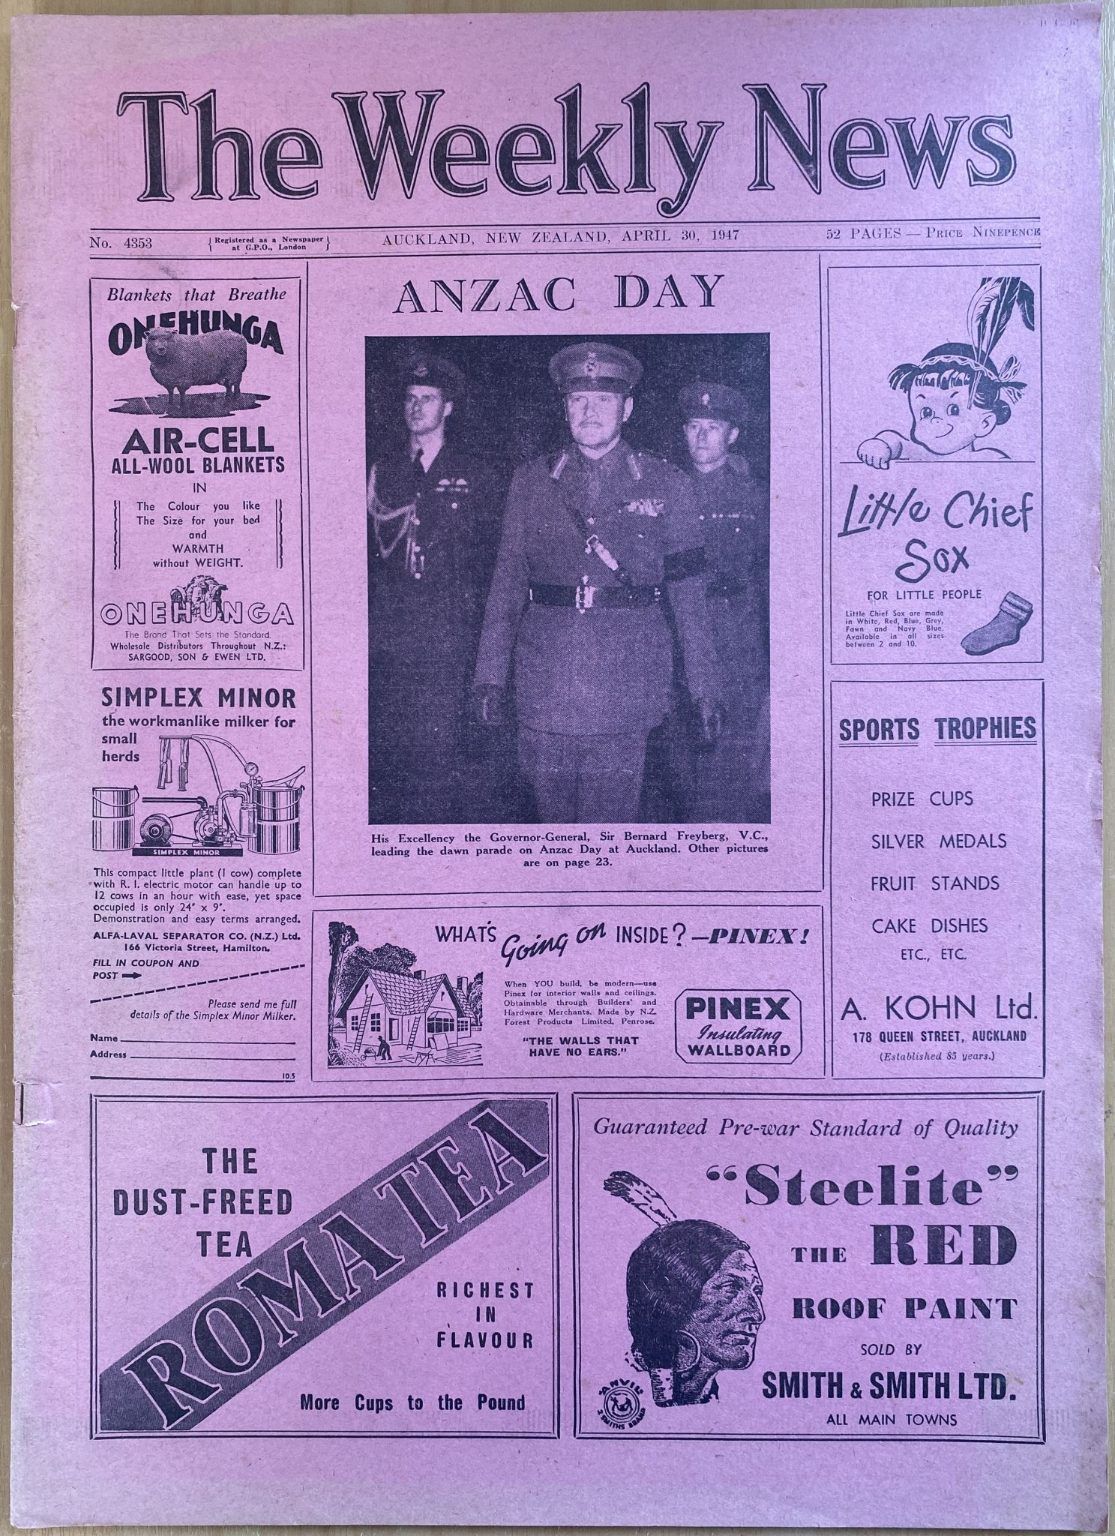 OLD NEWSPAPER: The Weekly News, No. 4353, 30 April 1947